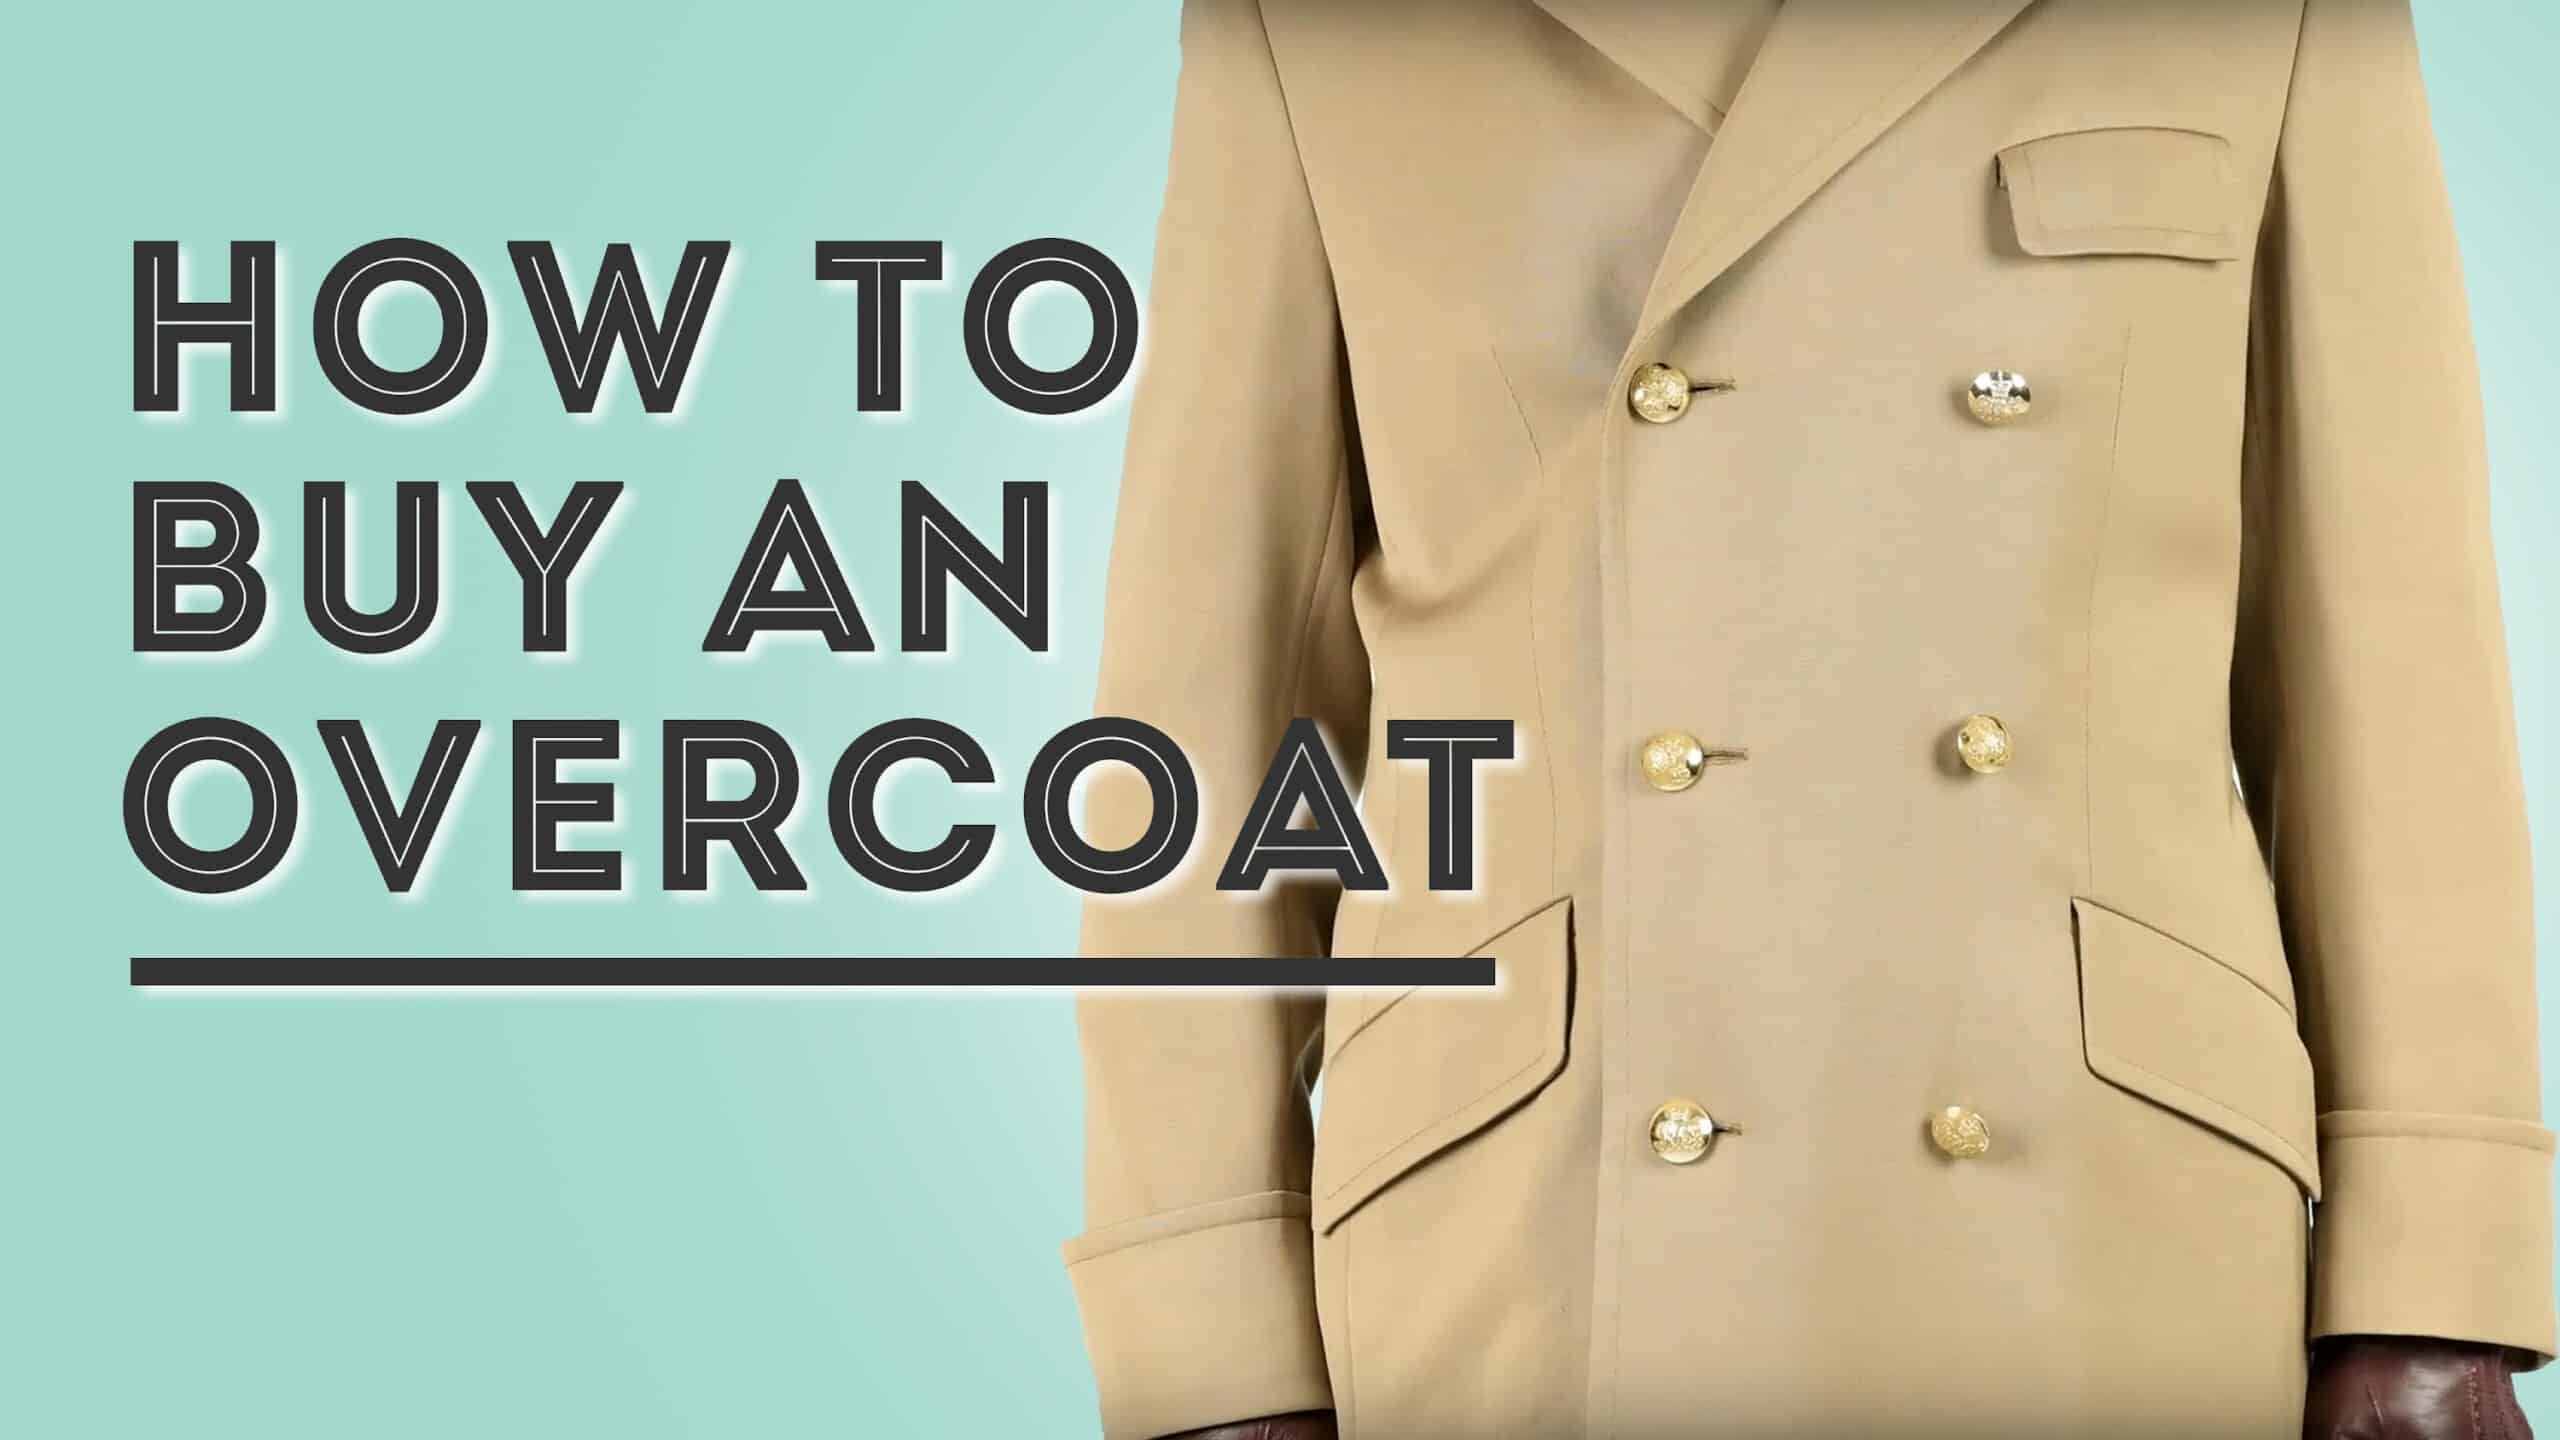 How To Buy An Overcoat scaled